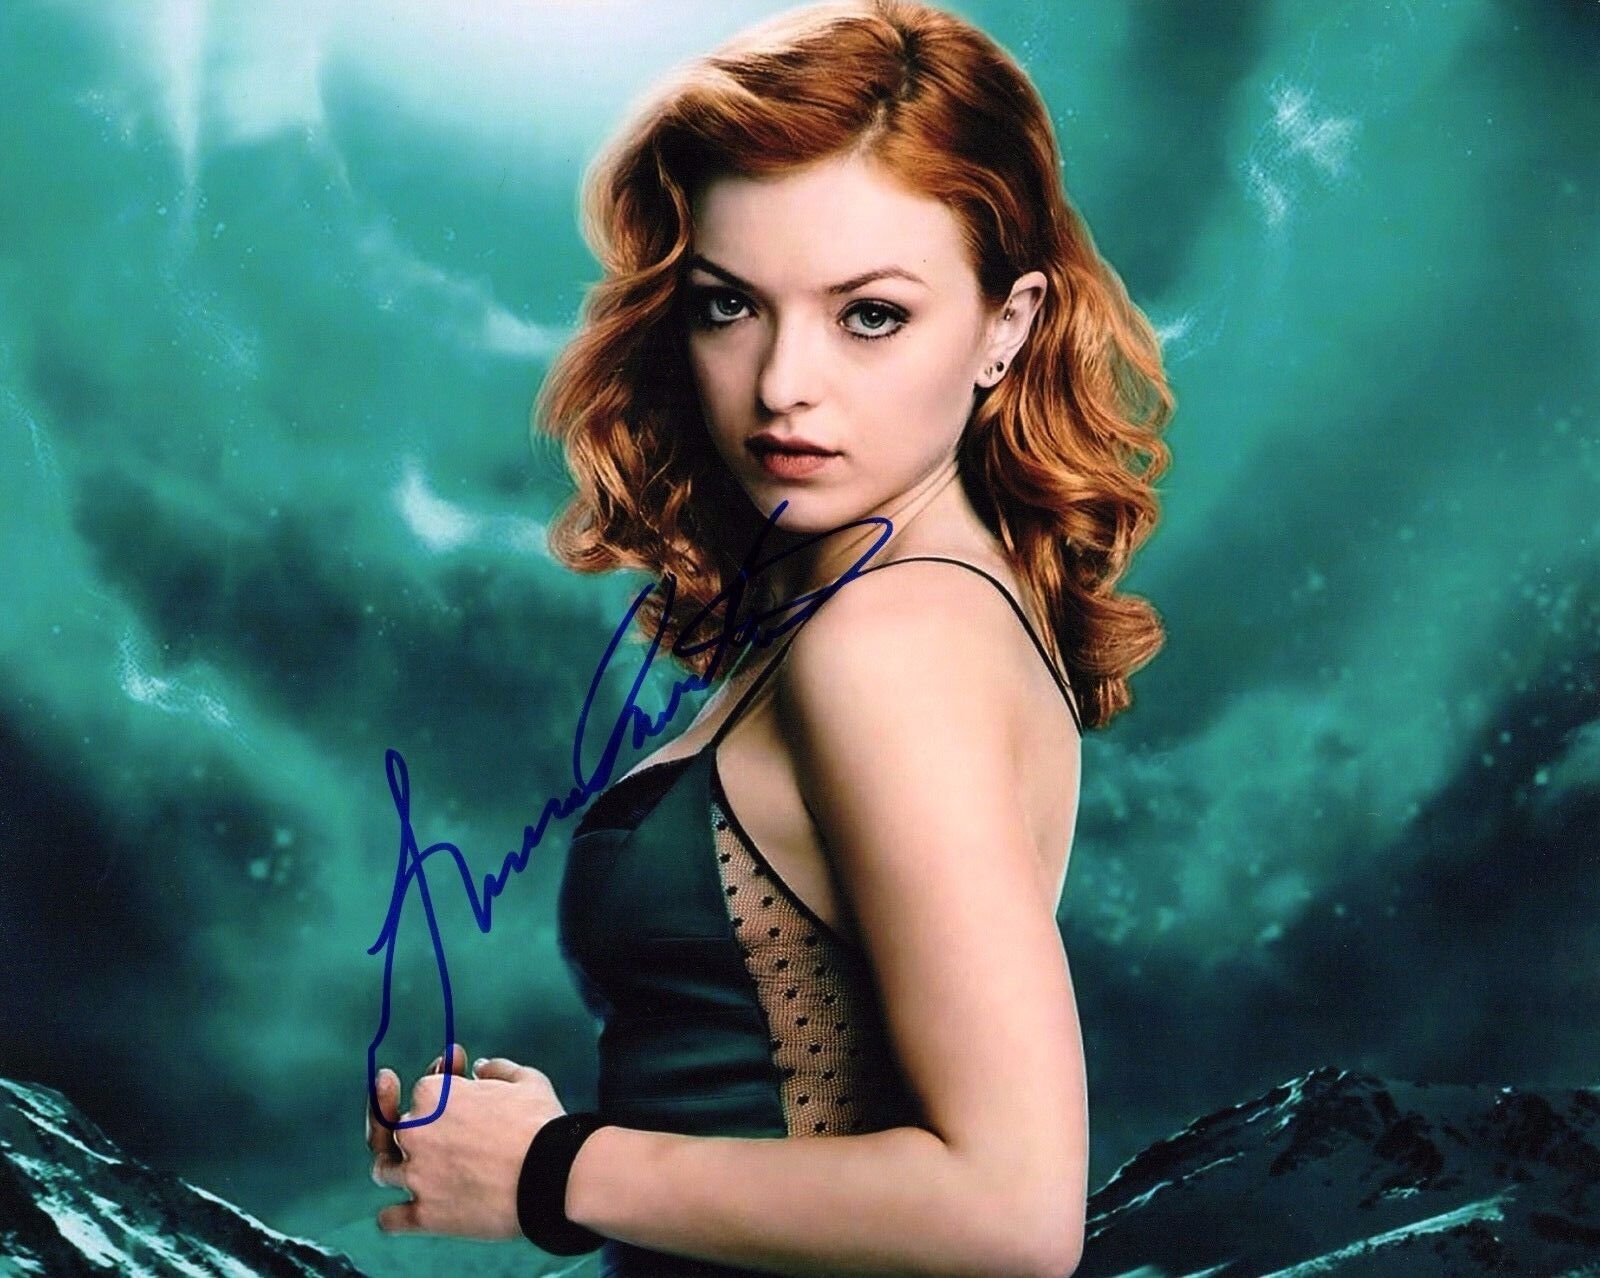 GFA Heroes Reborn * FRANCESCA EASTWOOD * Signed 8x10 Photo Poster painting PROOF AD5 COA